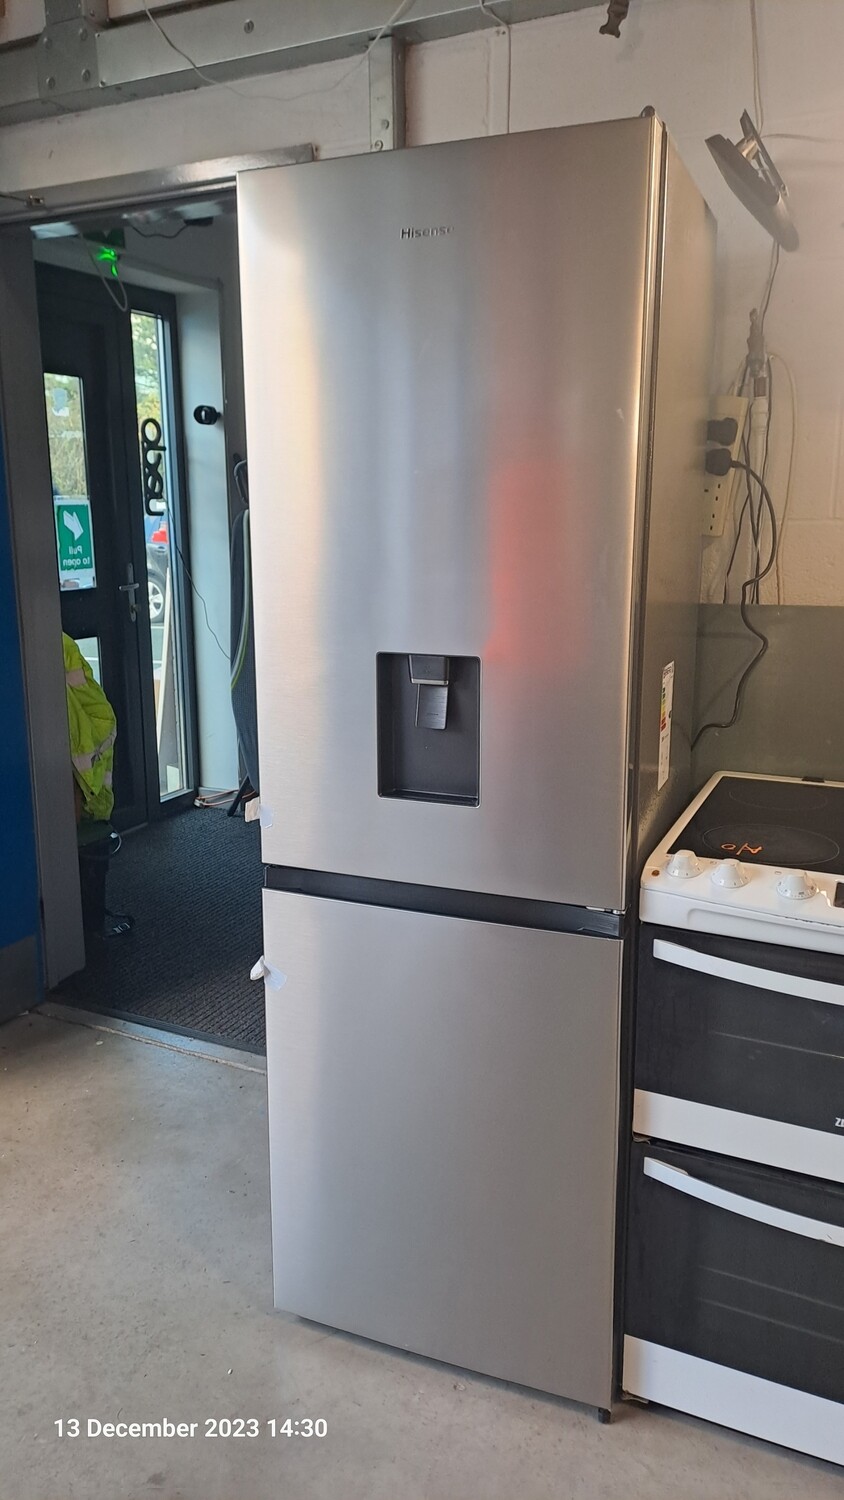 Hisense RB390N4WC1 Fridge Freezer 185 x W60 Stainless Steel Silver New Graded , Located in our Whitby Road shop